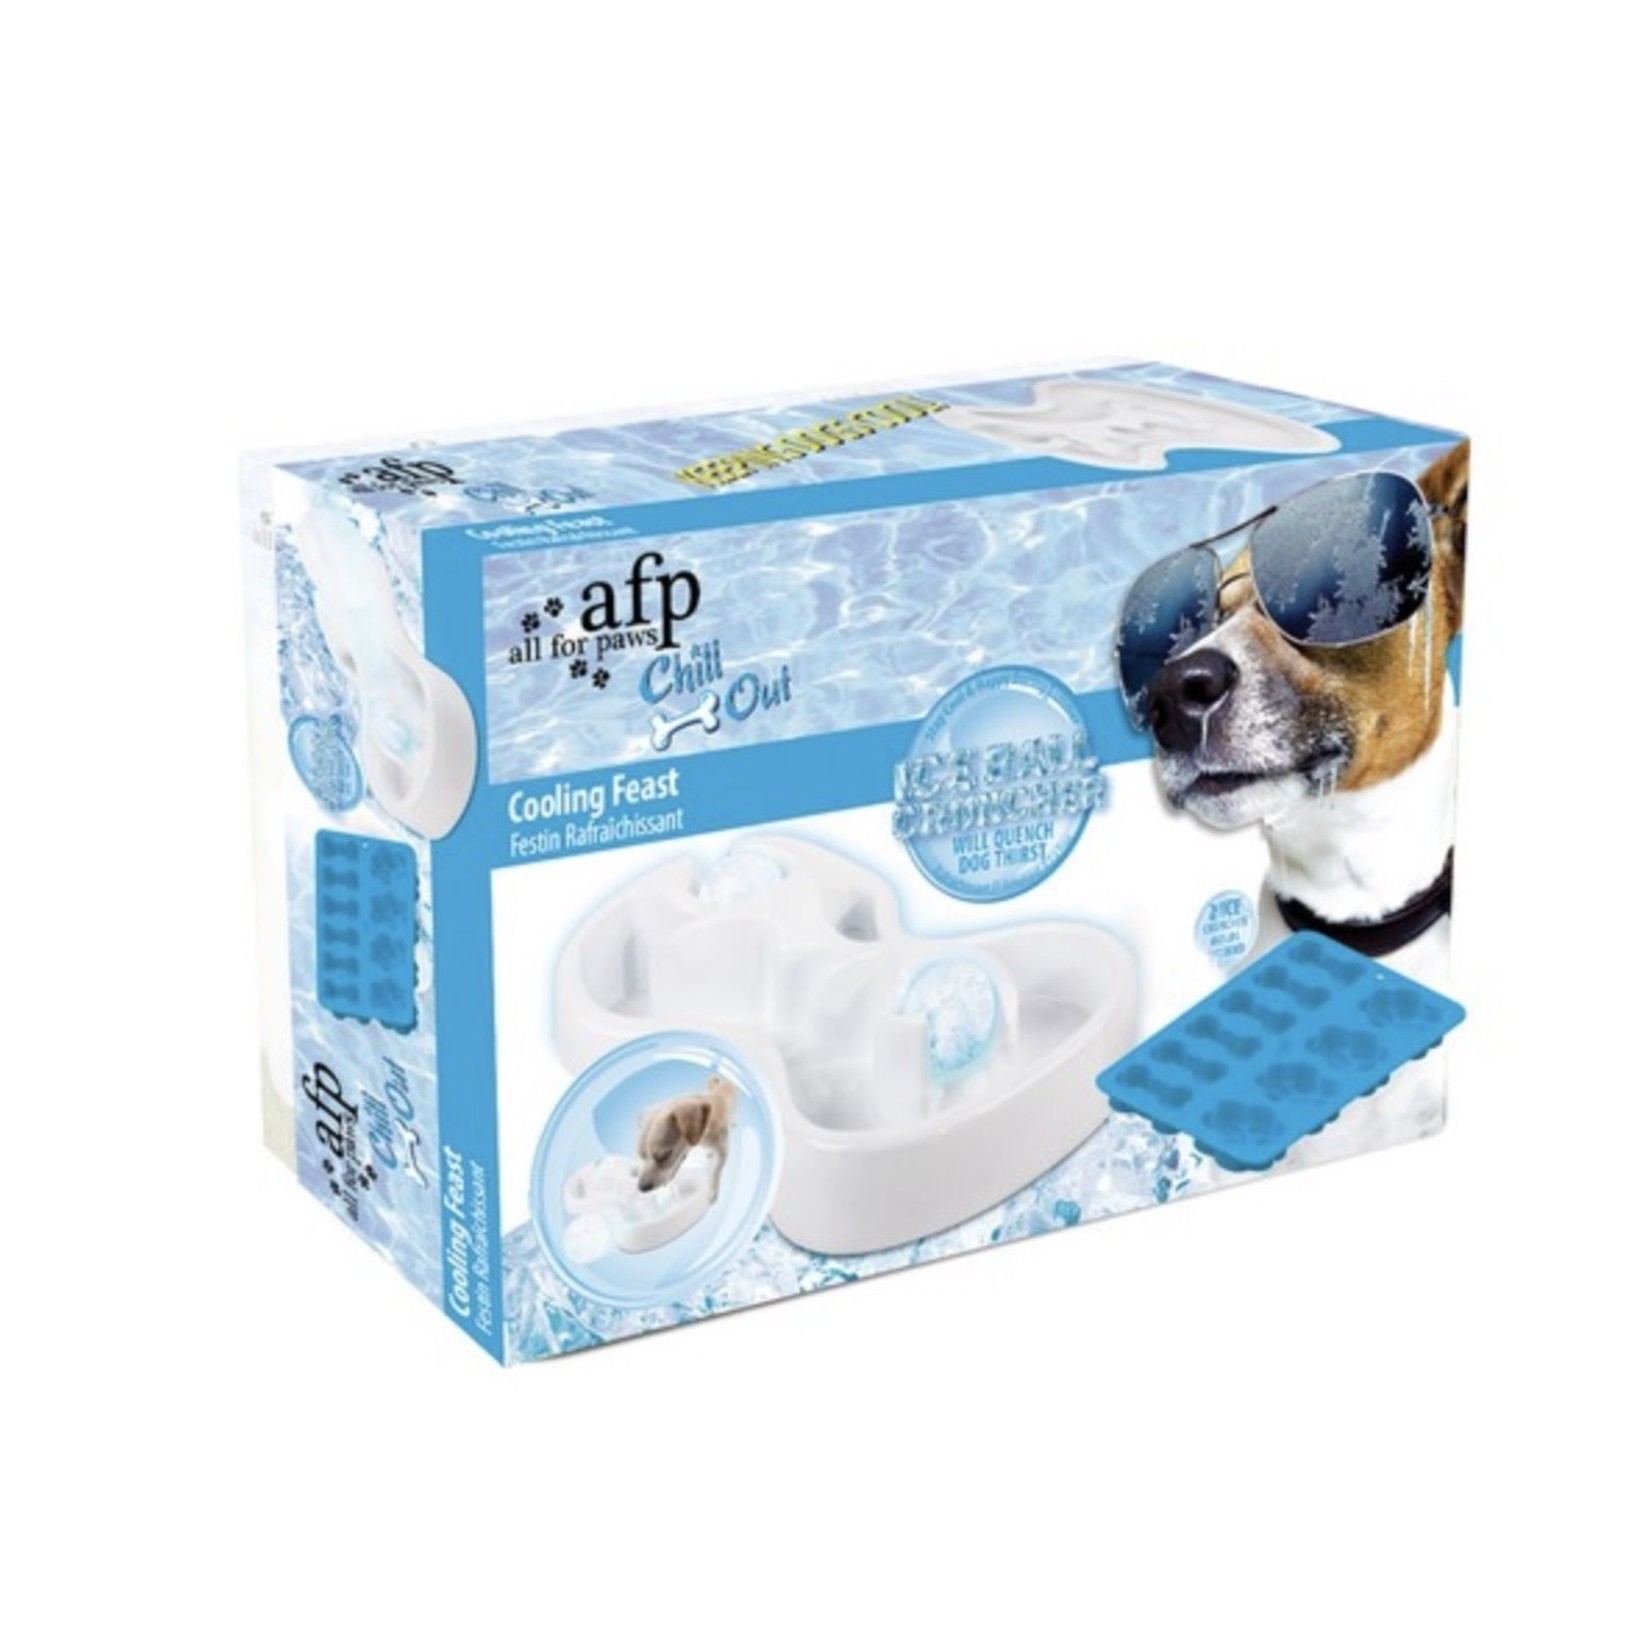 All For Paws Chill Out Cooling Feast Ice Bones Dog Toy